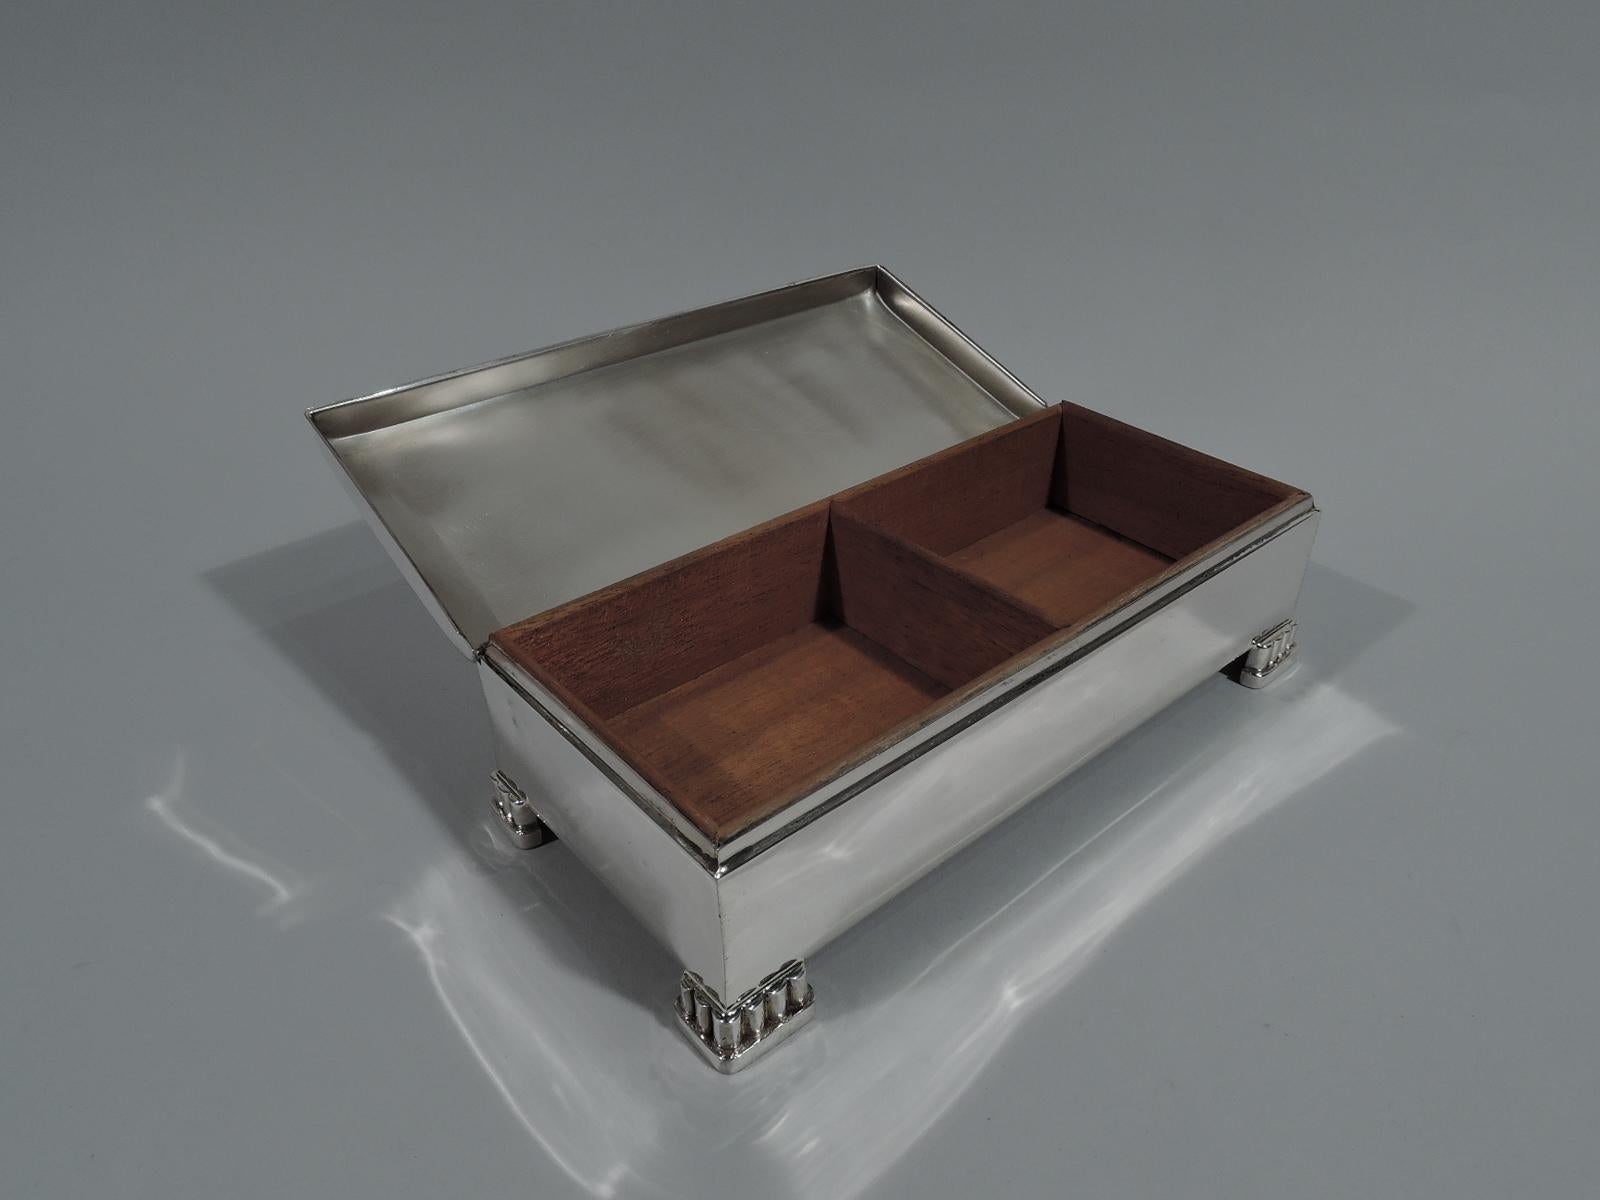 Classic American Mid-Century Modern Sterling Silver Box by Poole 1